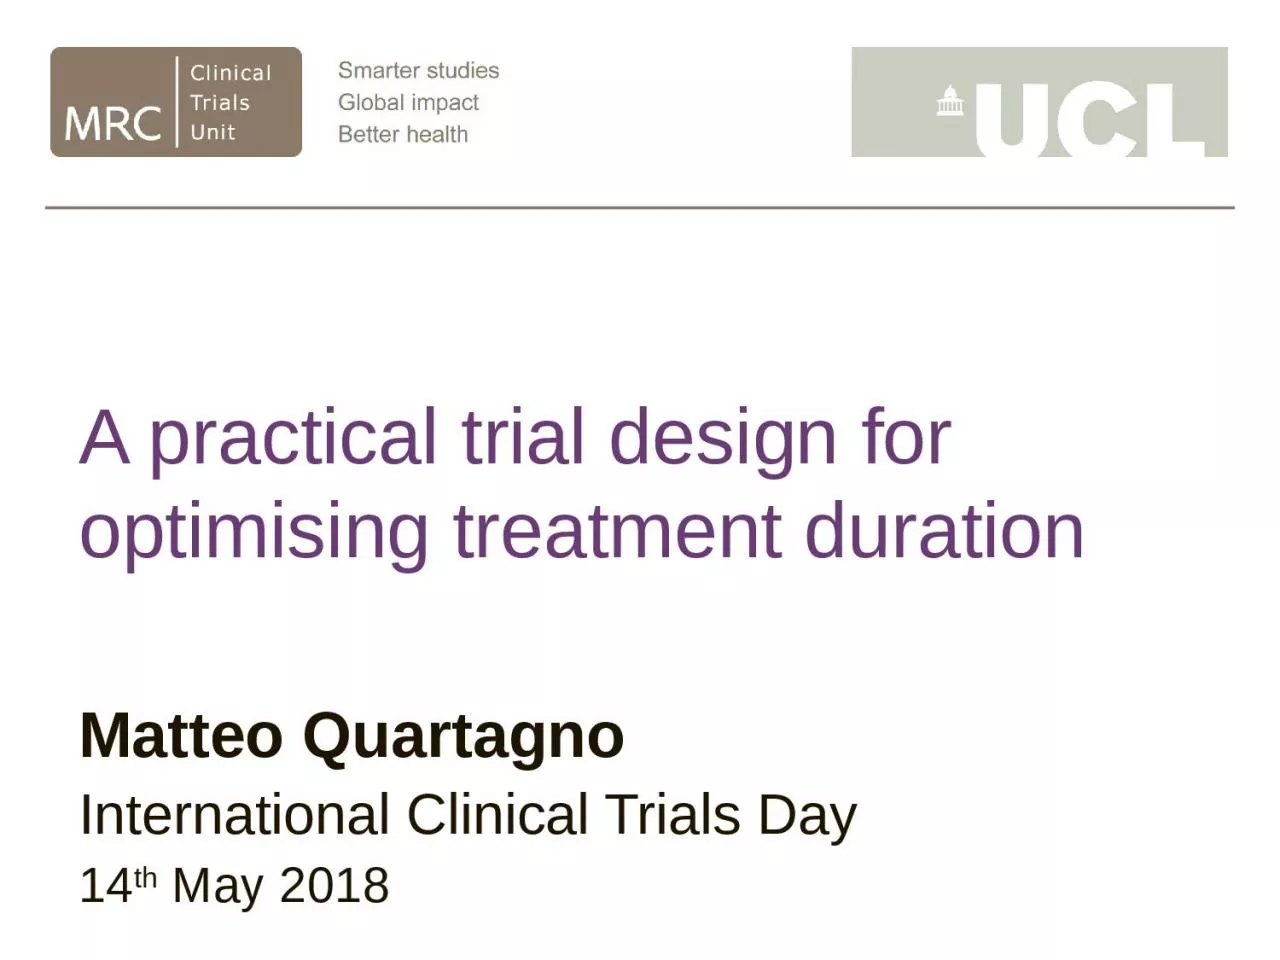 A practical trial design for optimising treatment duration